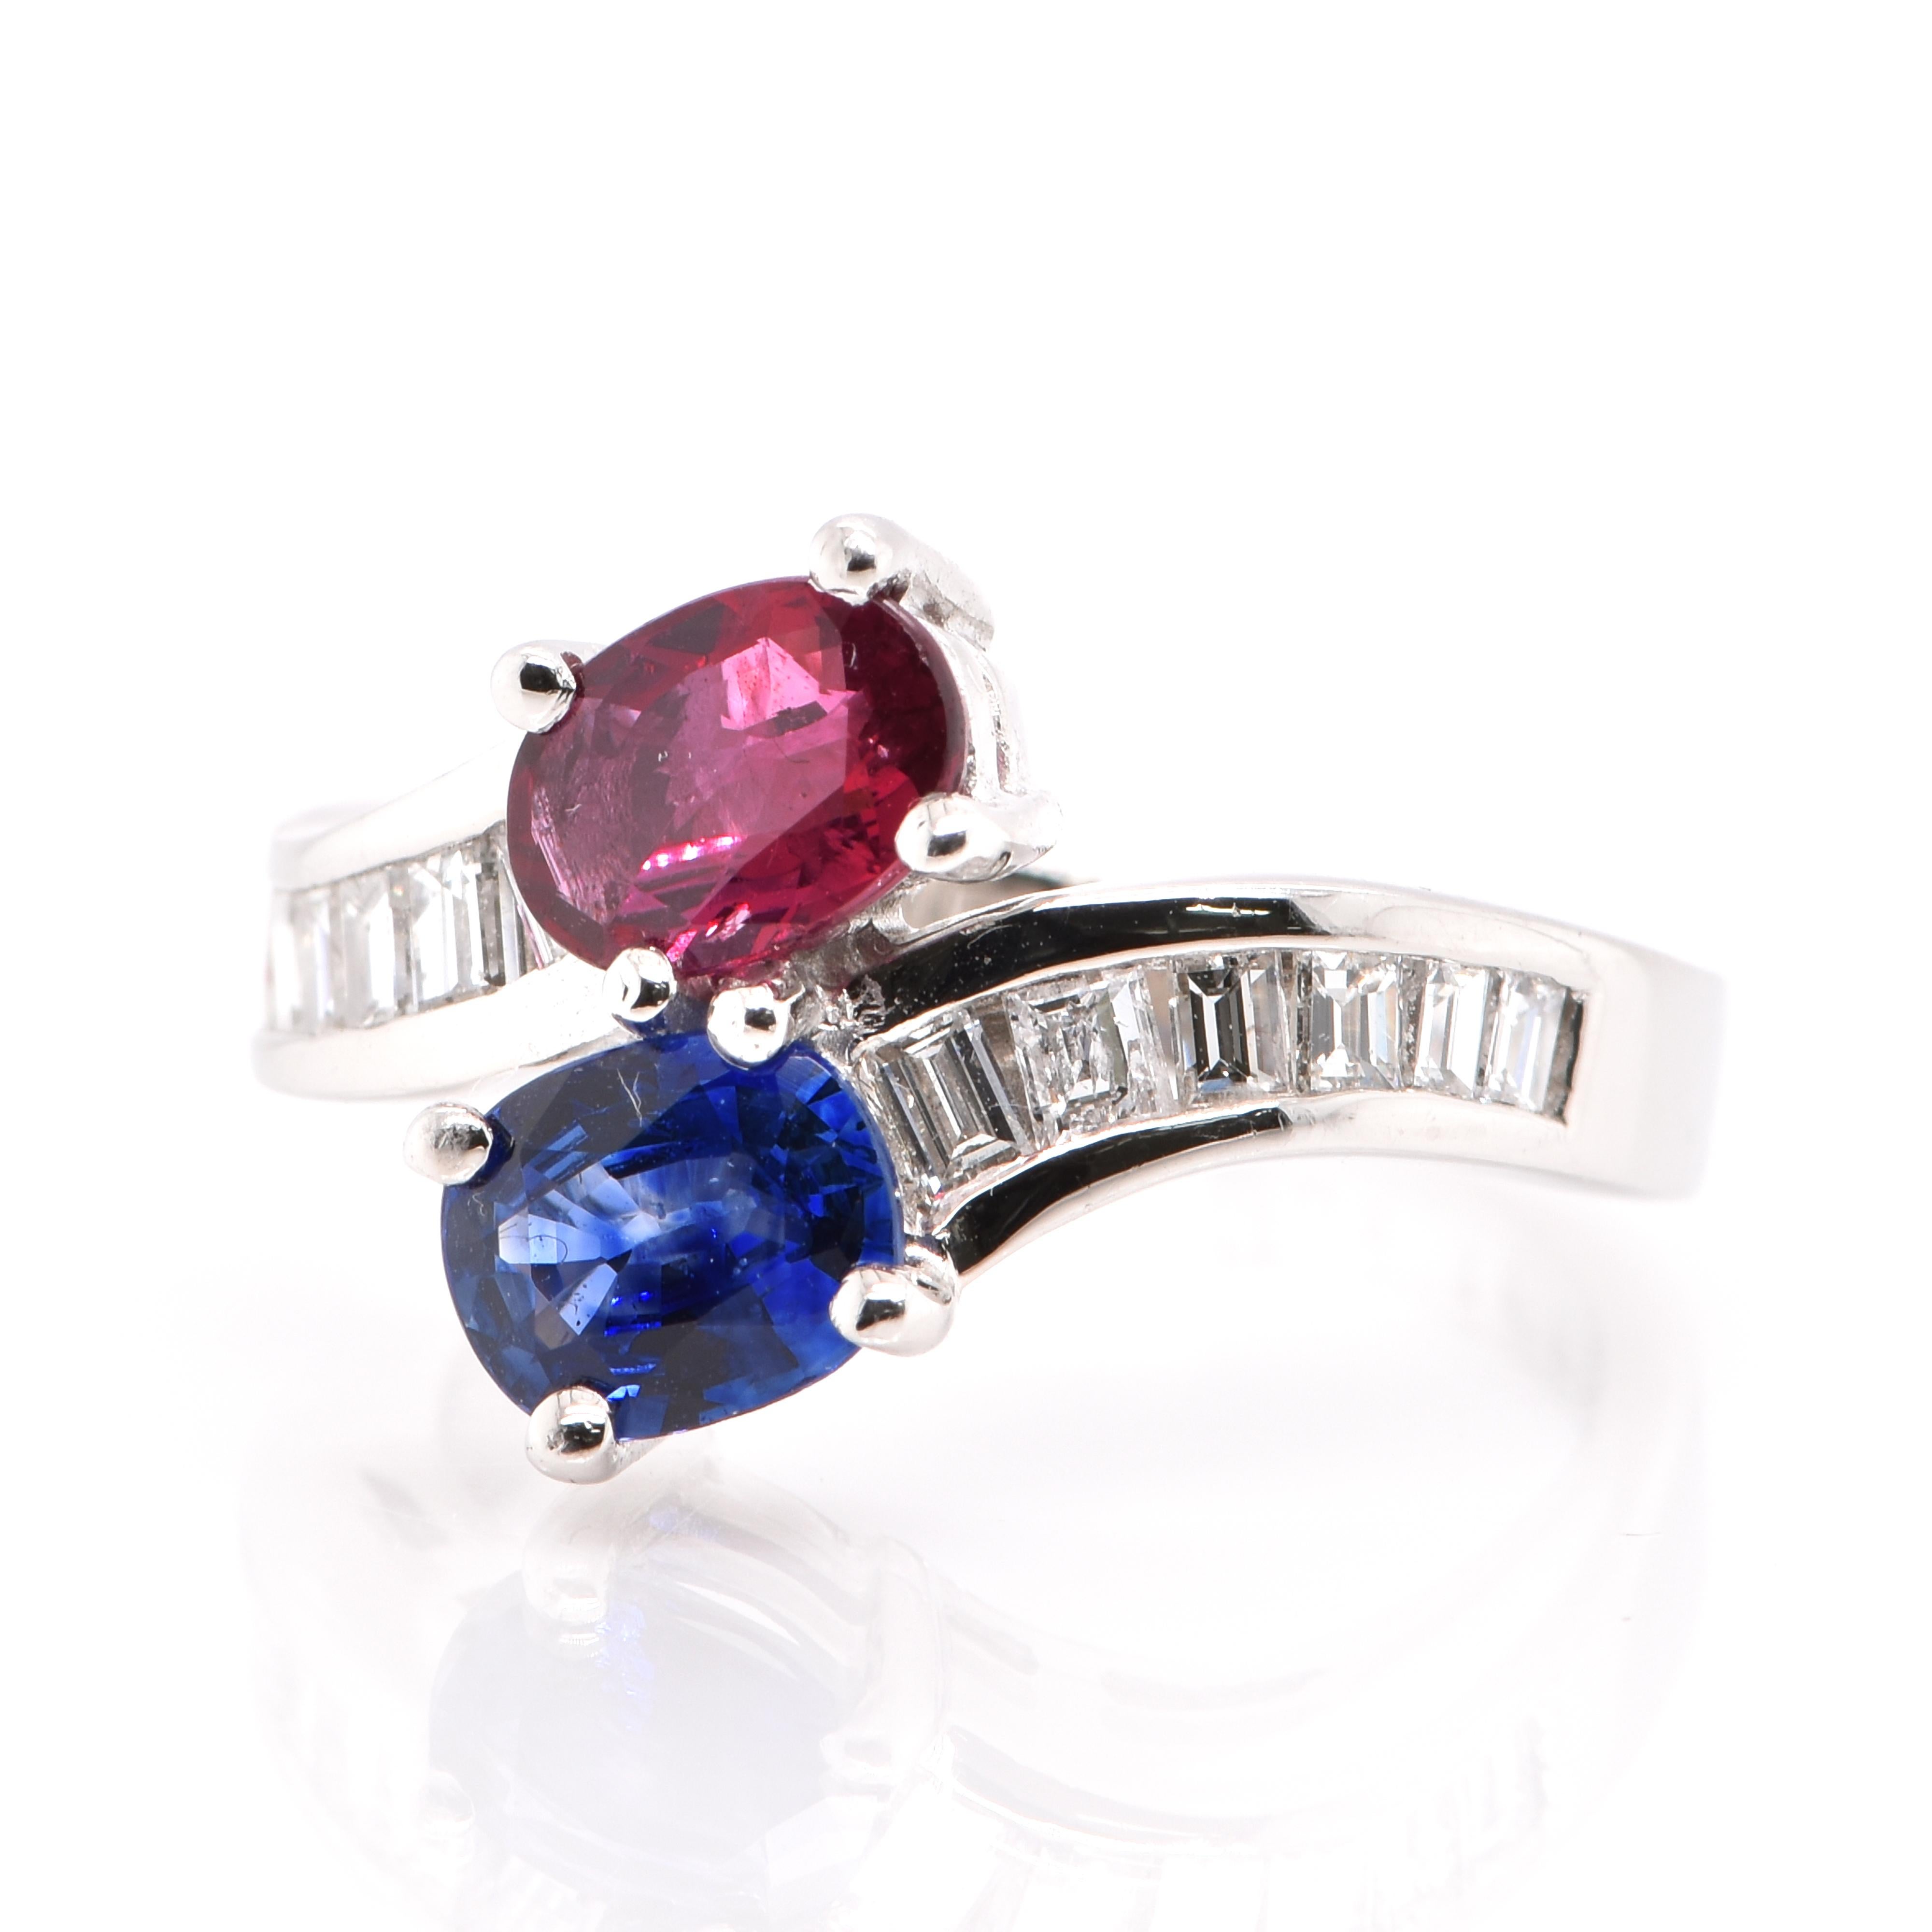 A beautiful Duo Ring featuring a 0.93 Carat, Natural, Ruby, 0.91 Carat Natural, Blue Sapphire and 0.61 Carats of Diamond Accents set in Platinum. Sapphires and Ruby both belong to the Corundum Family of Gems. They have extraordinary durability -